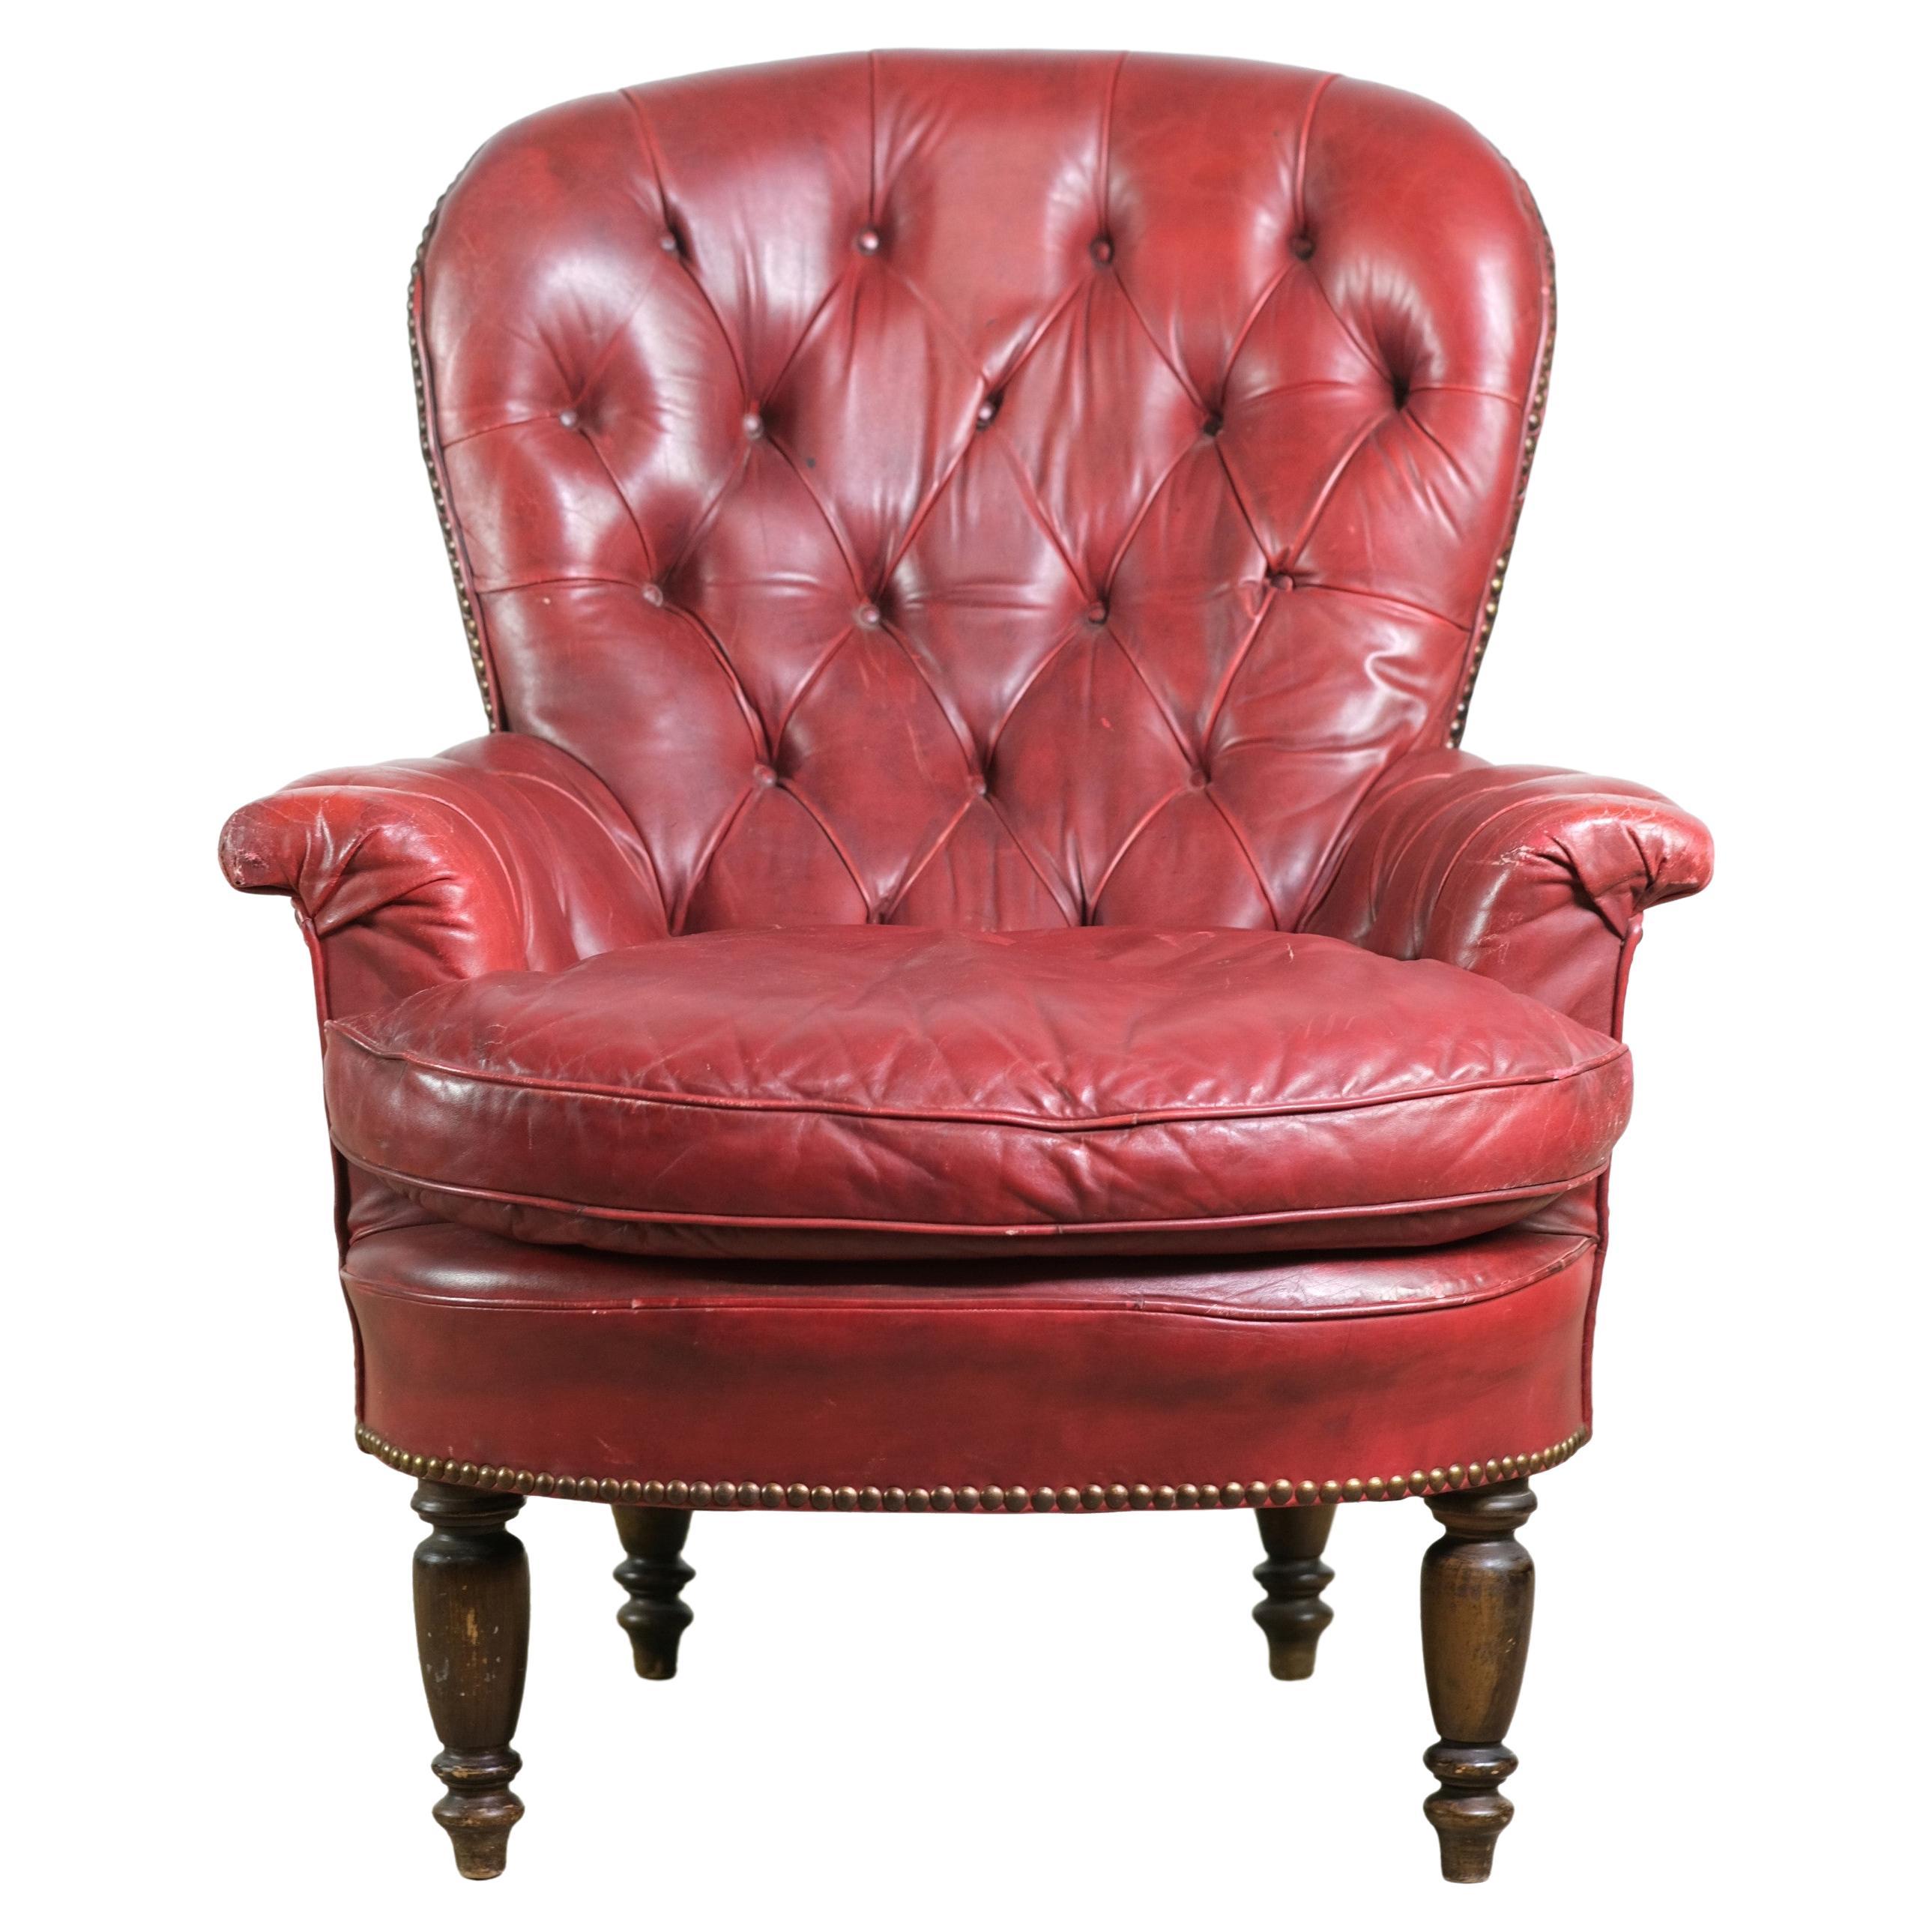 Red Tufted Leather Club Chair Turned Wood Legs Dark Stain